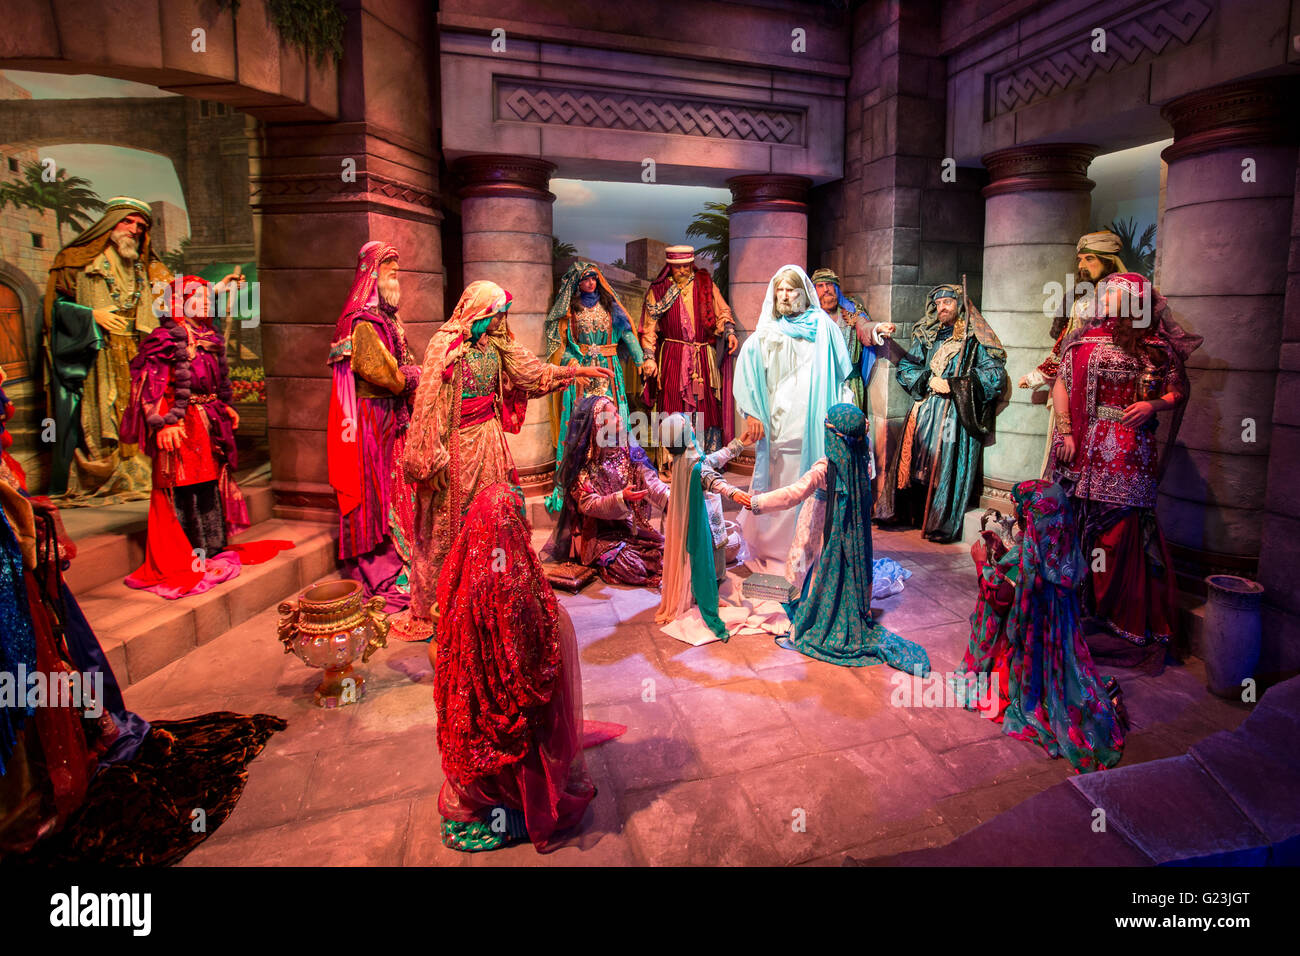 A scene from the life of Jesus in the Scriptorium at the Holy Land Experience Christian theme park in Orlando, Florida. Stock Photo